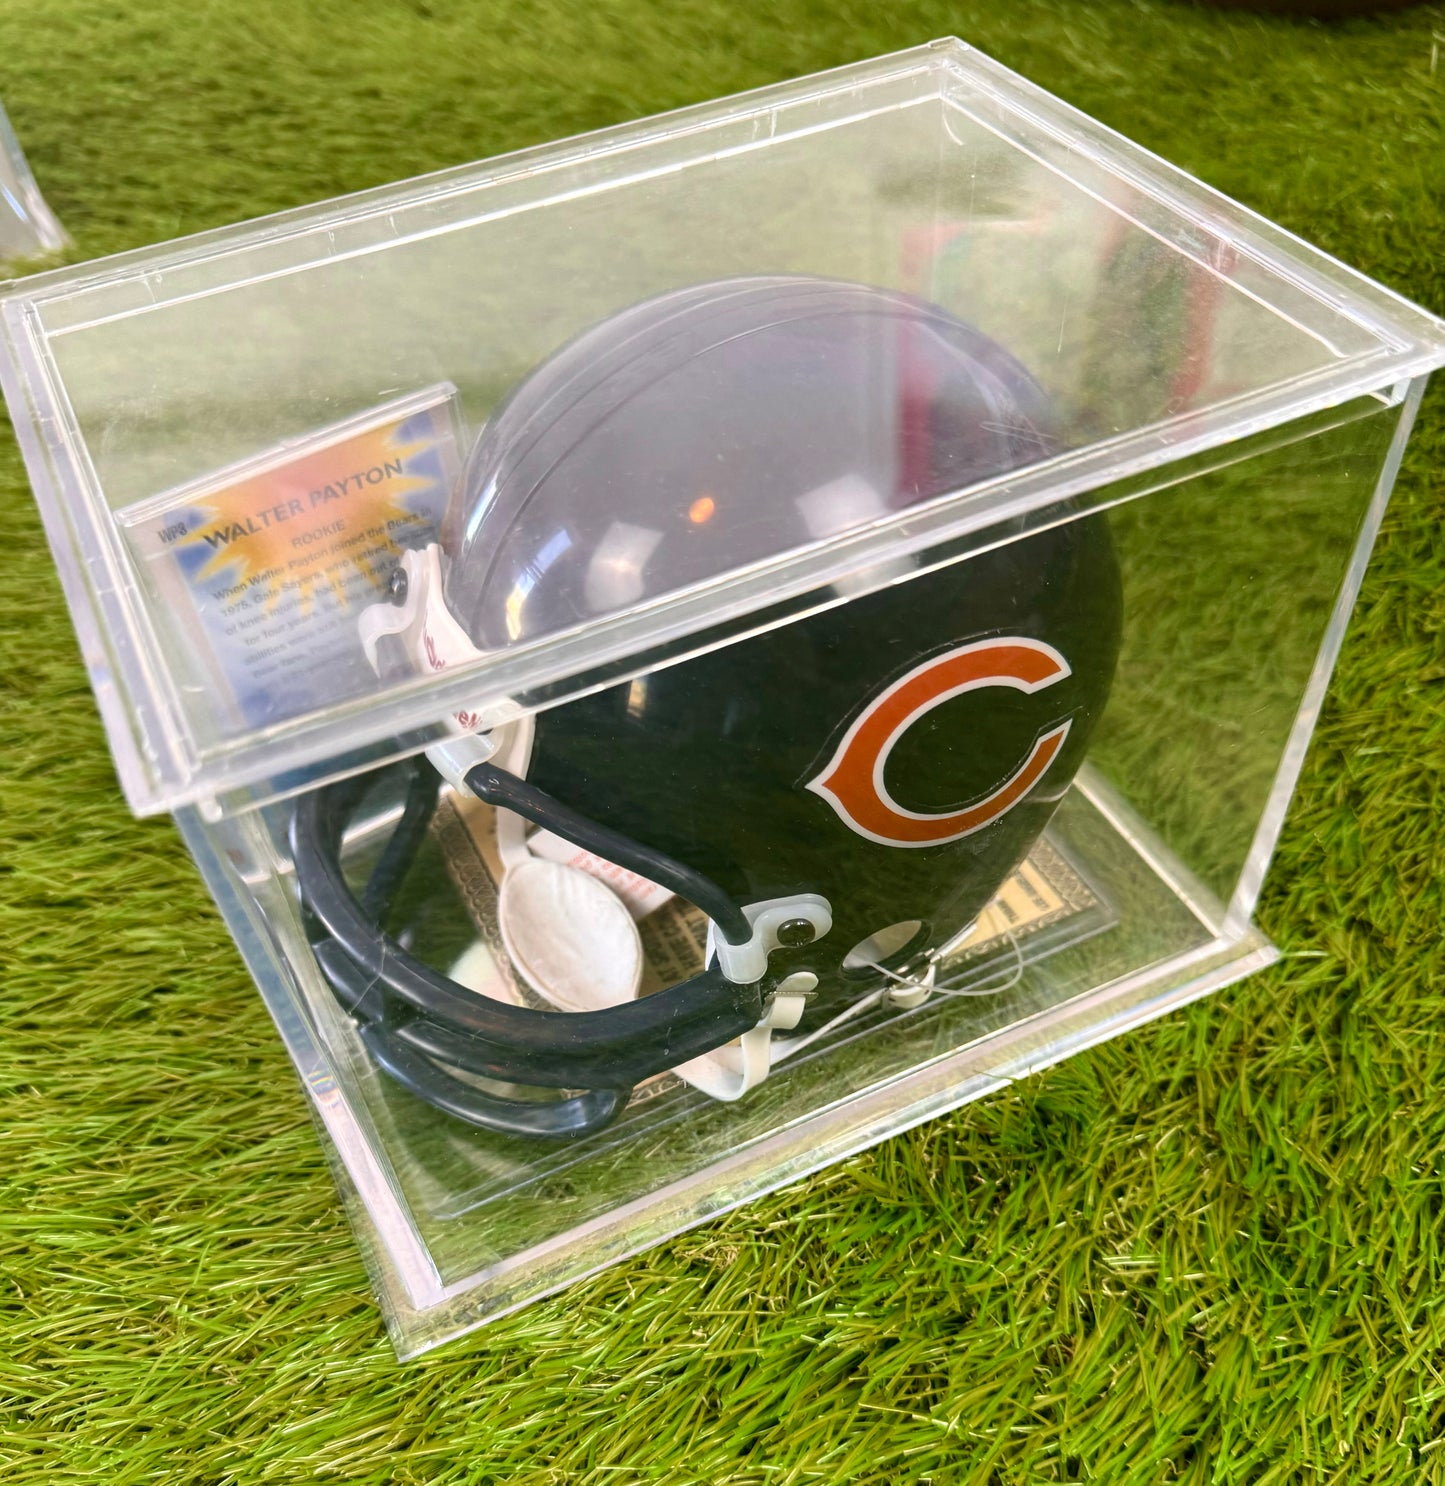 Chicago Bears Walter Payton Signed Autographed NFL Mini Football Helmet and Card